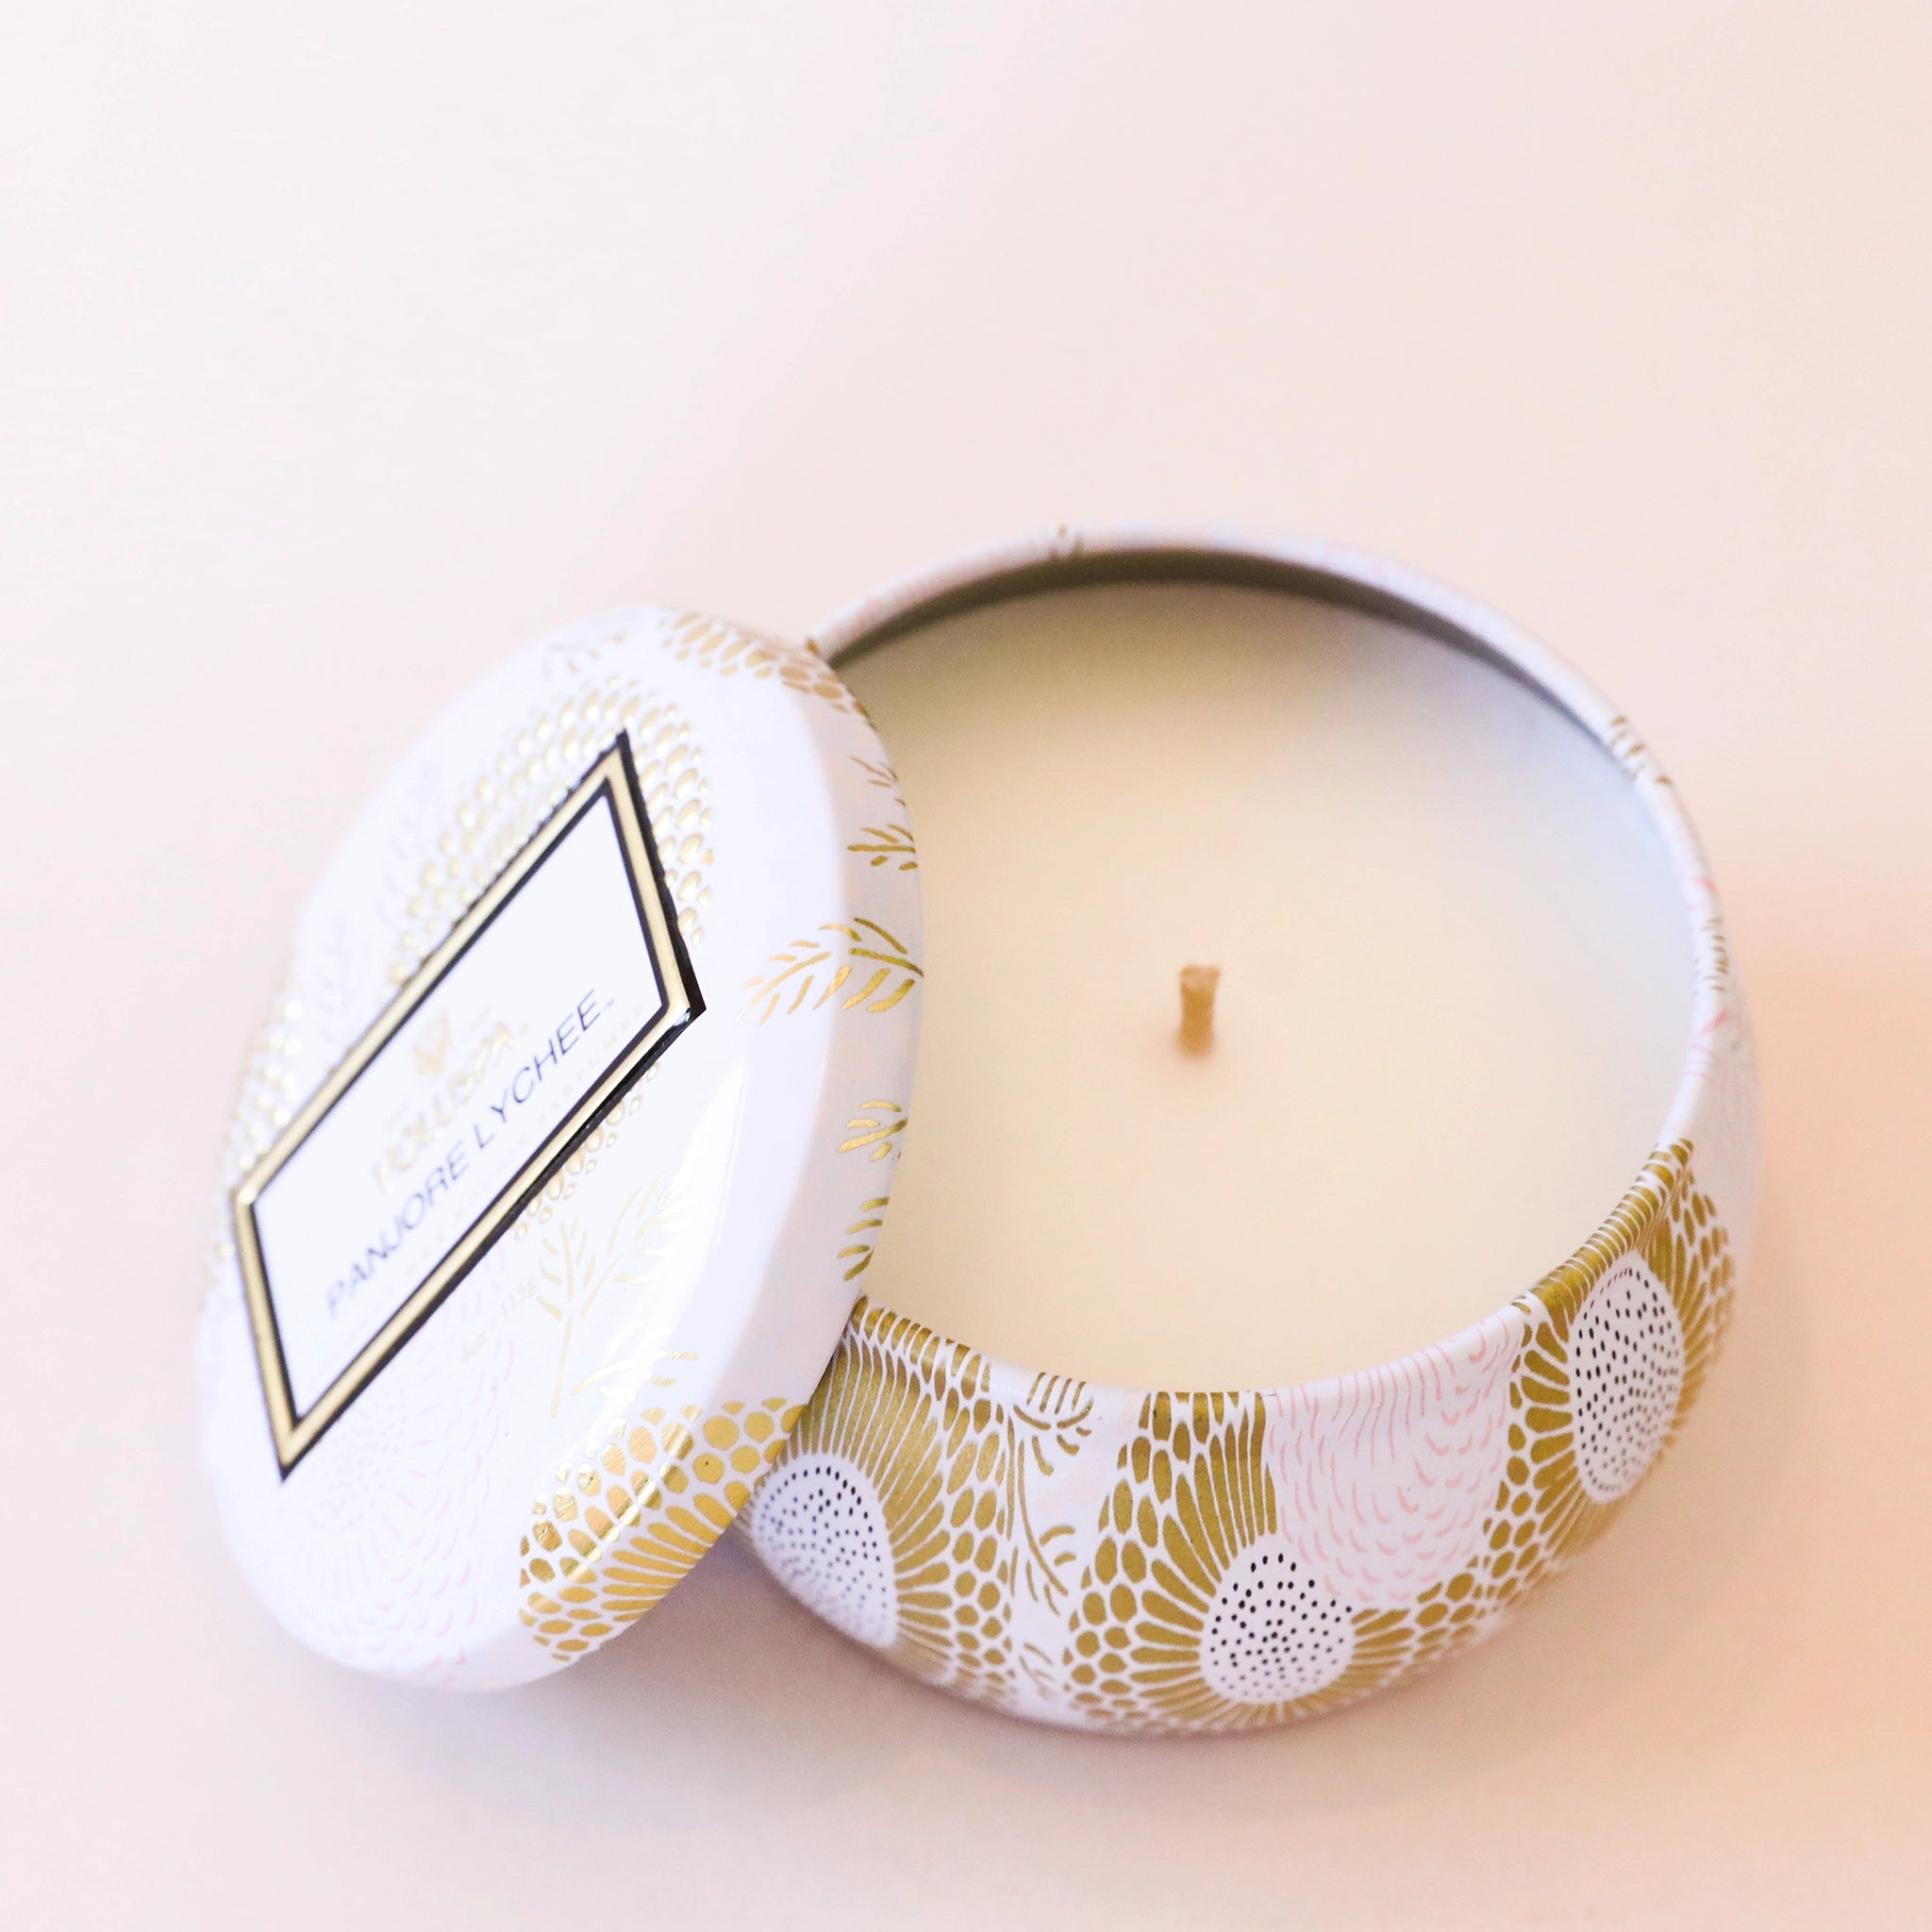 Birds eye view of a short, round tin. Inside the tin is a white candle with a white wick in the center. The tin is light pink with a gold floral pattern. There is a matching lid leaning against the left side of the tin.